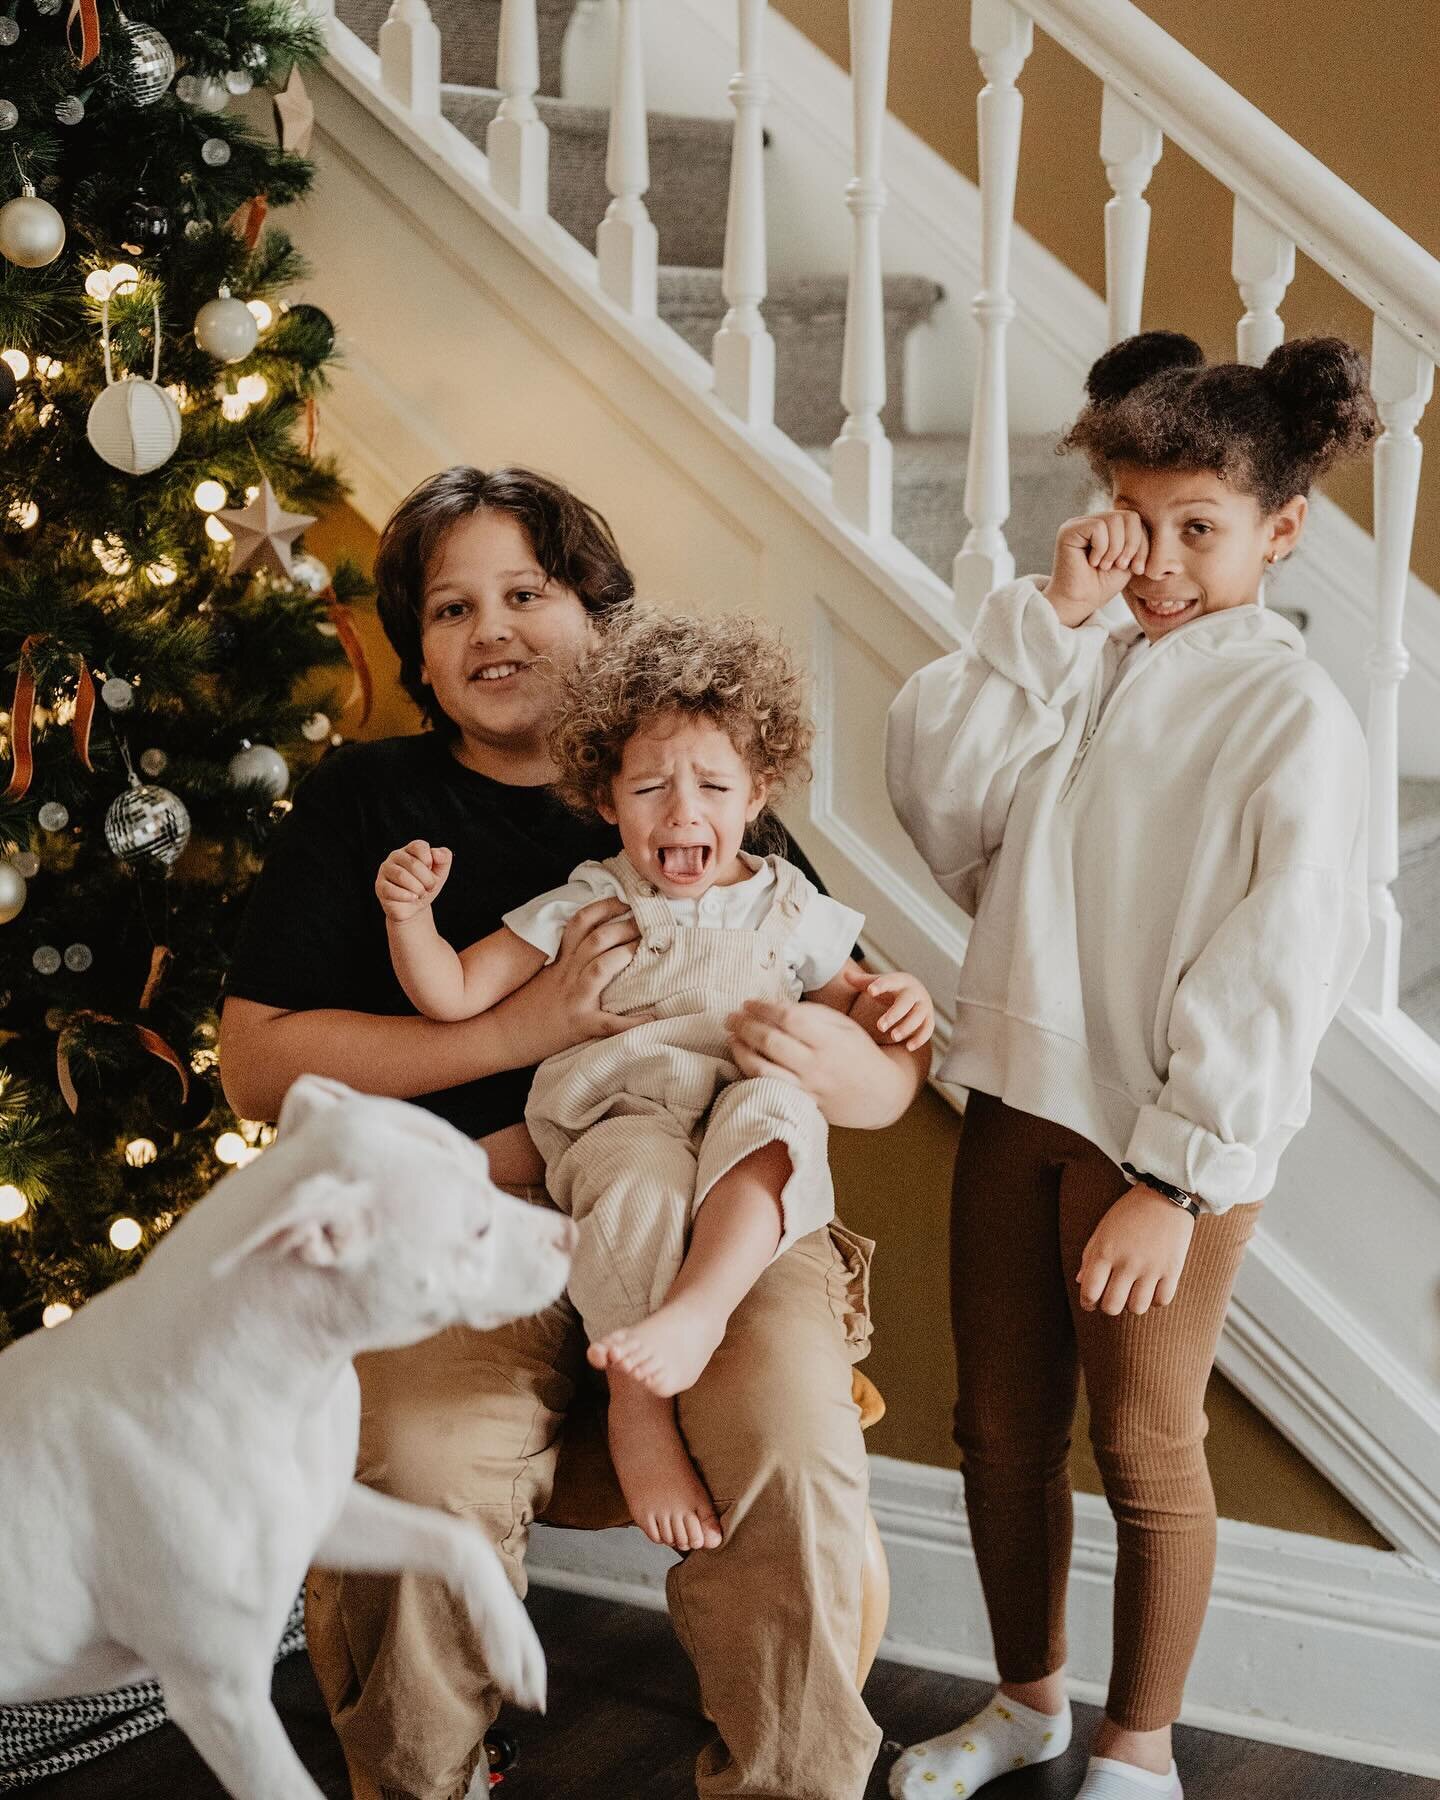 I took these family card pics on the last possible day to order cards, got them ASAP, ended up sending out 90% and had to move onto another Christmas preparation. I say this because I know it&rsquo;s relatable, and because it fully illustrates how I&